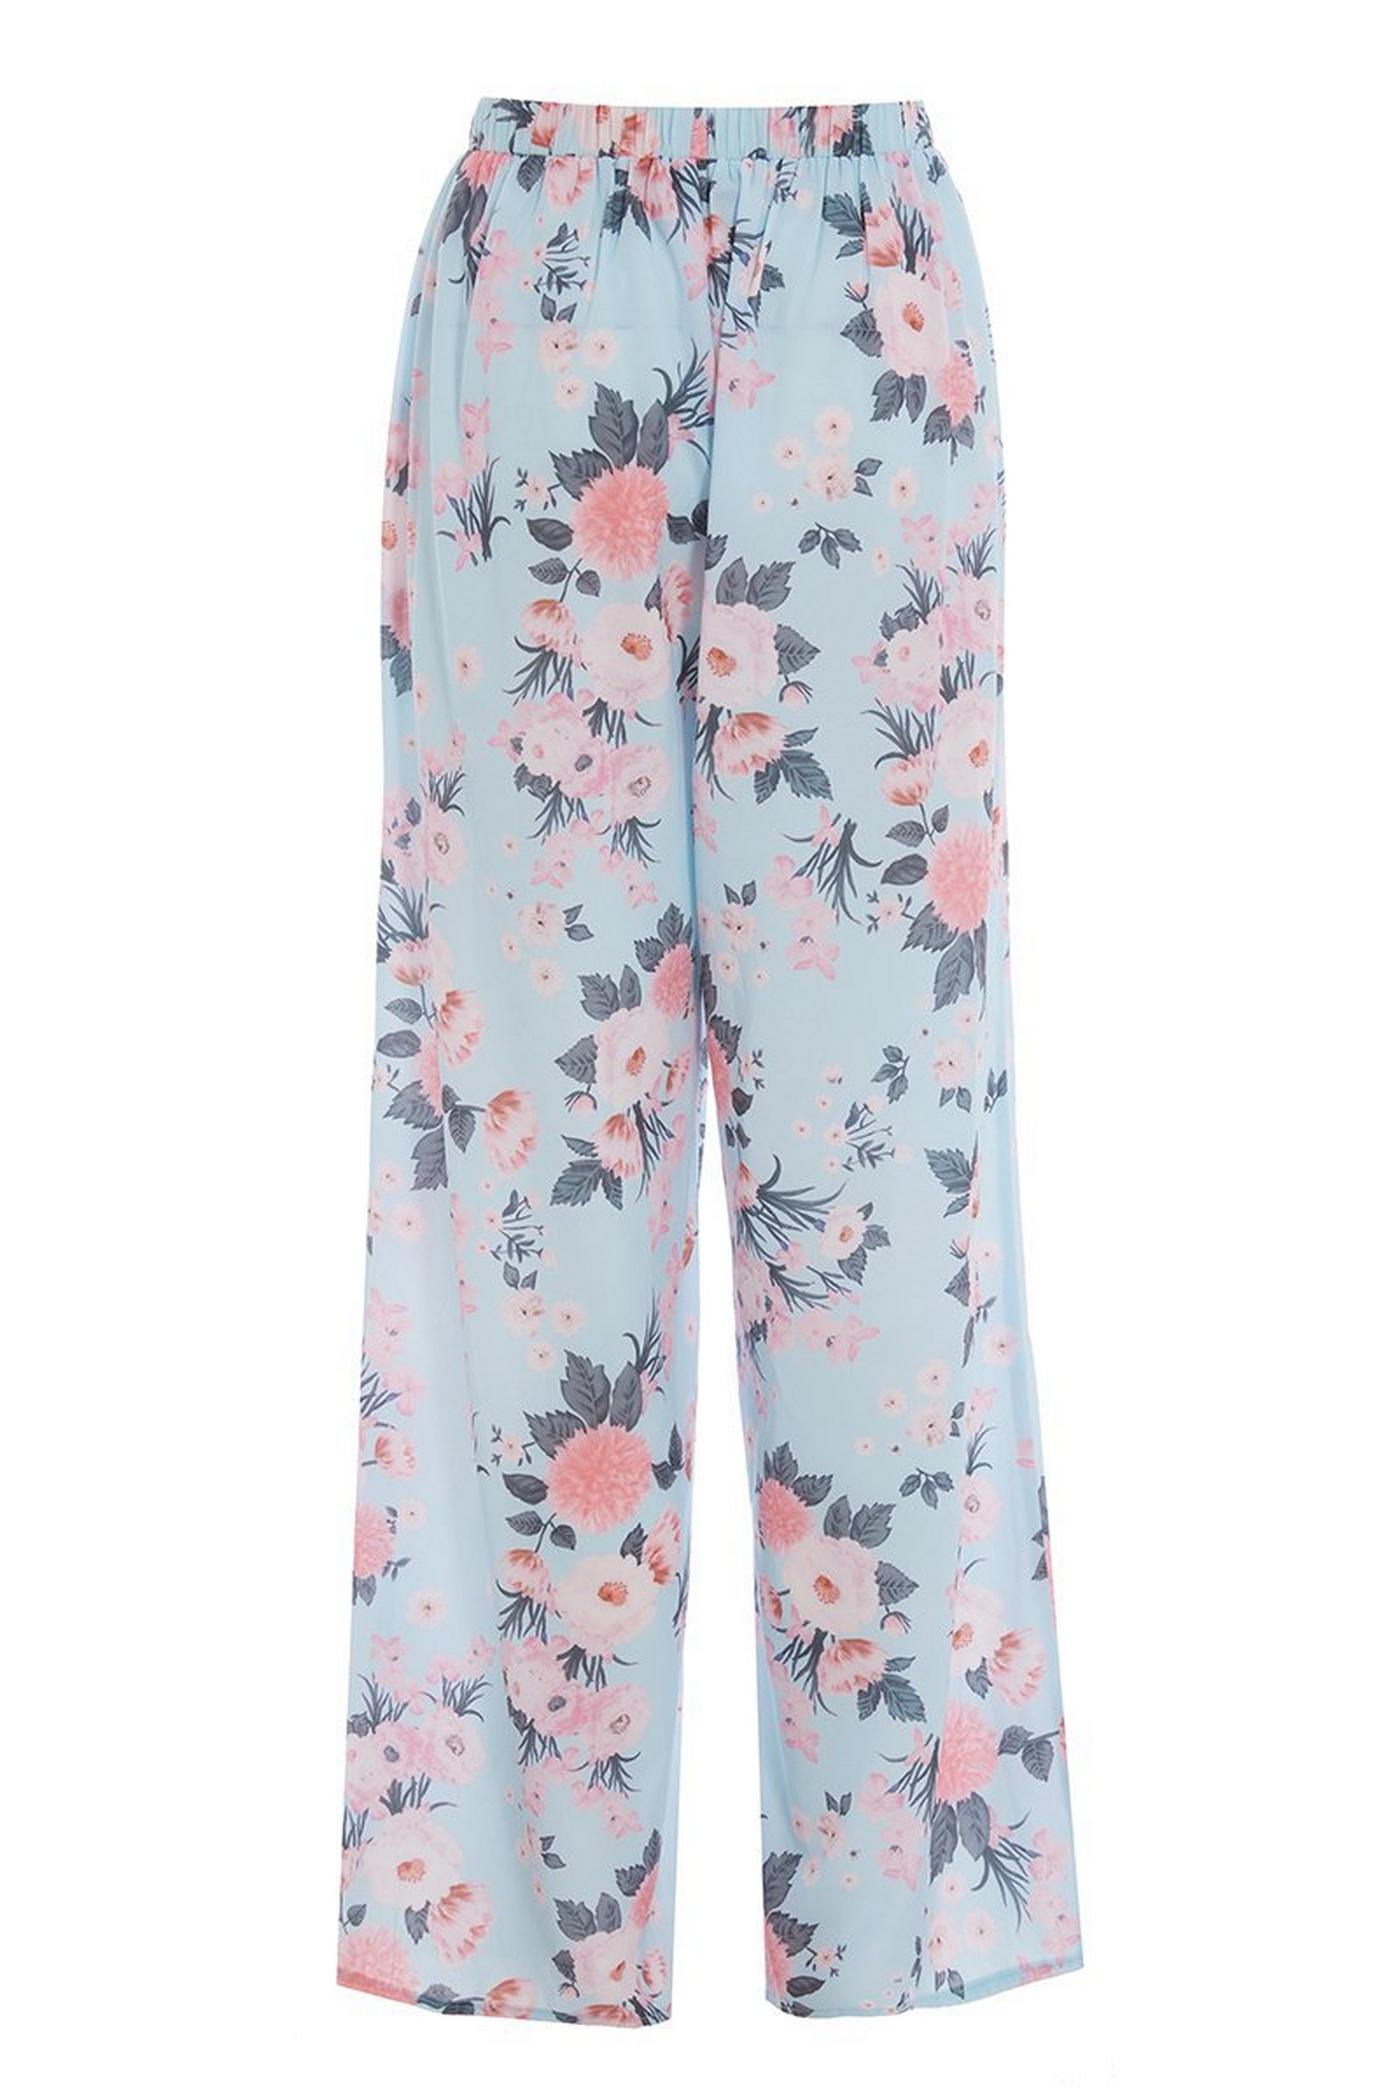 Blue & Pink Floral Palazzo Trousers